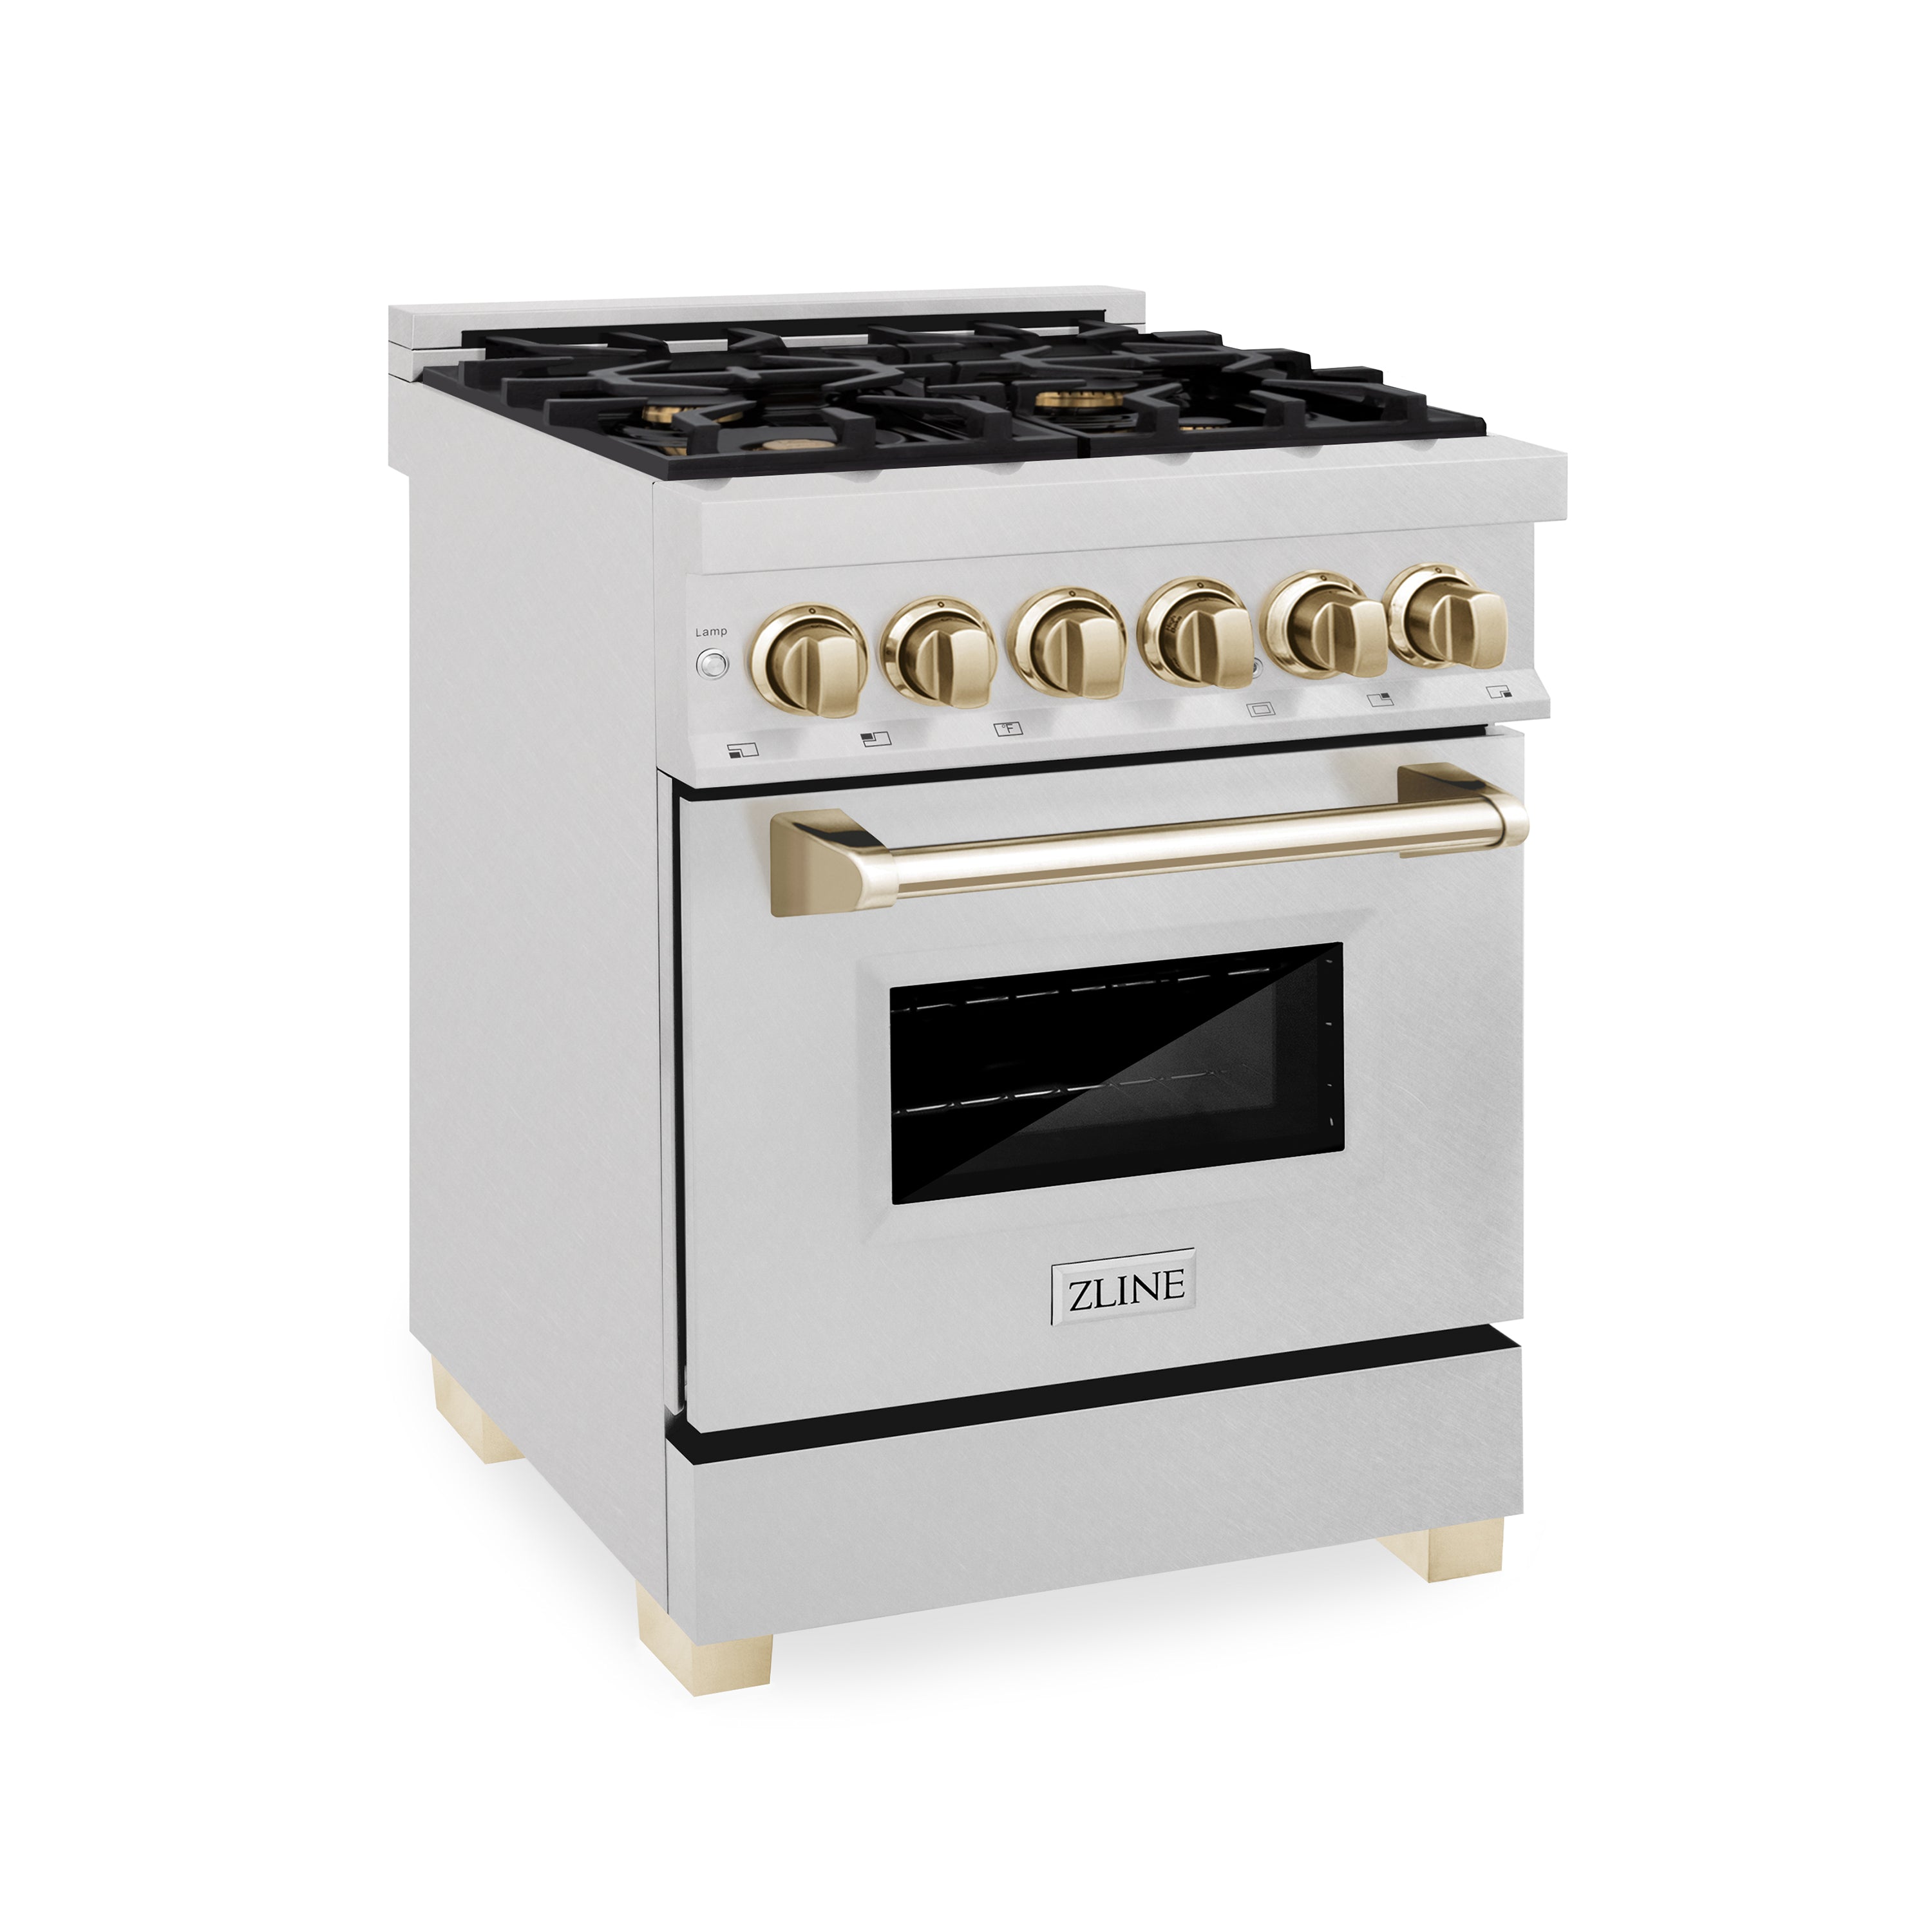 ZLINE Autograph Edition 24" 2.8 cu. ft. Dual Fuel Range with Gas Stove and Electric Oven in Fingerprint Resistant Stainless Steel with Polished Gold Accents (RASZ-SN-24-G)